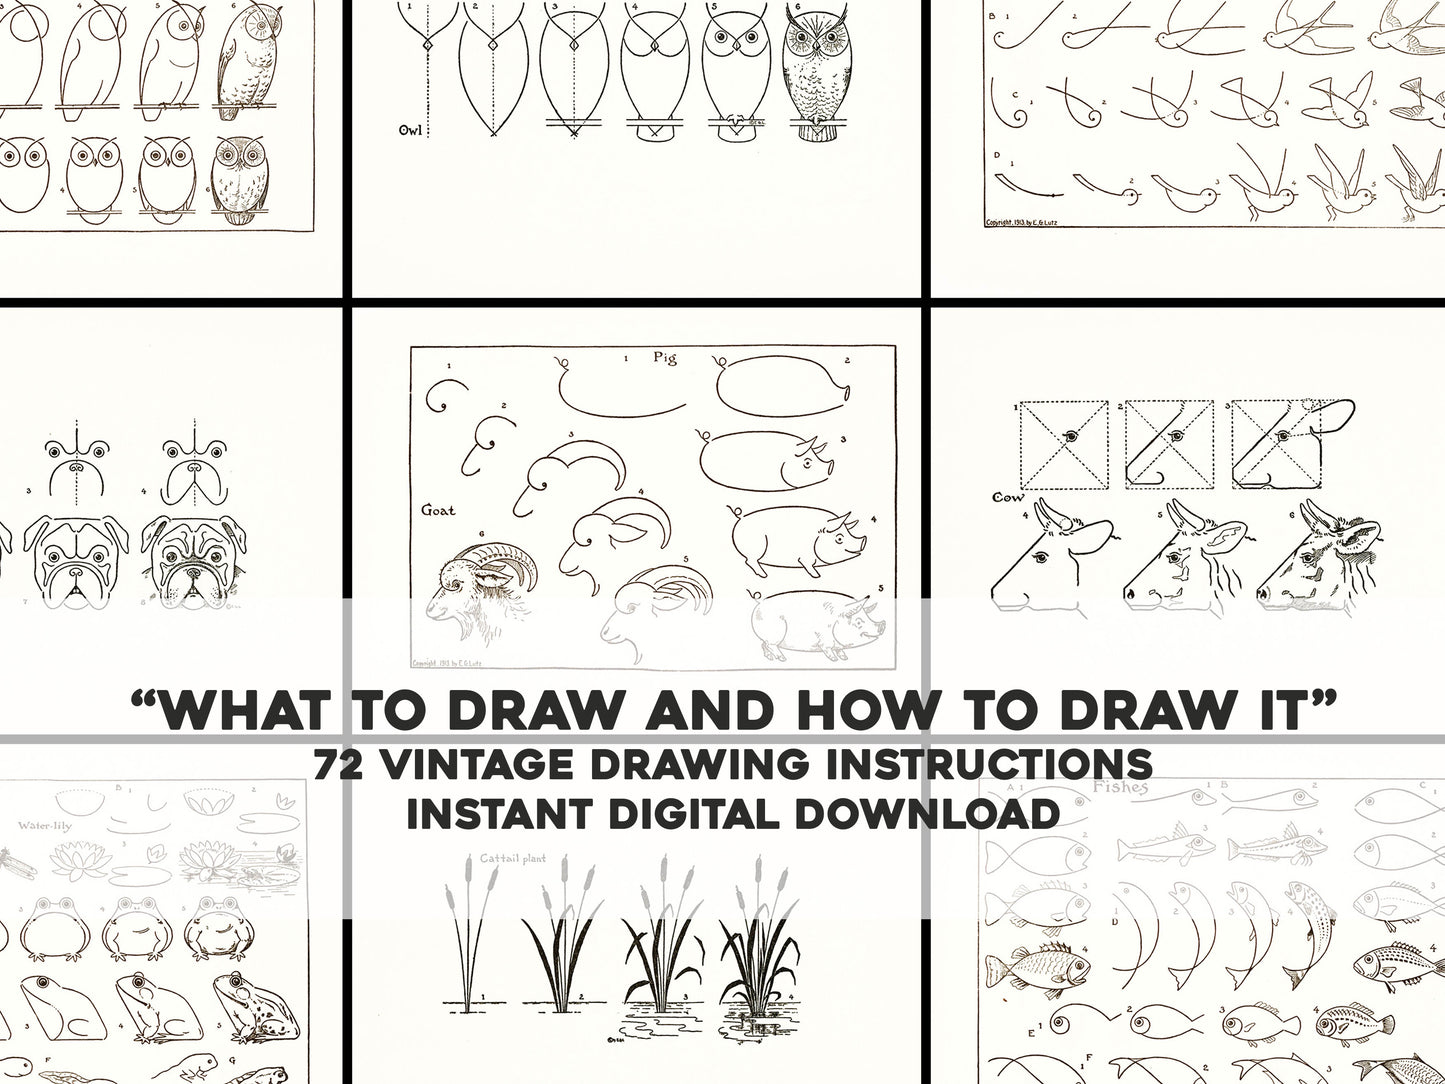 What to Draw and How to Draw It [72 Images]